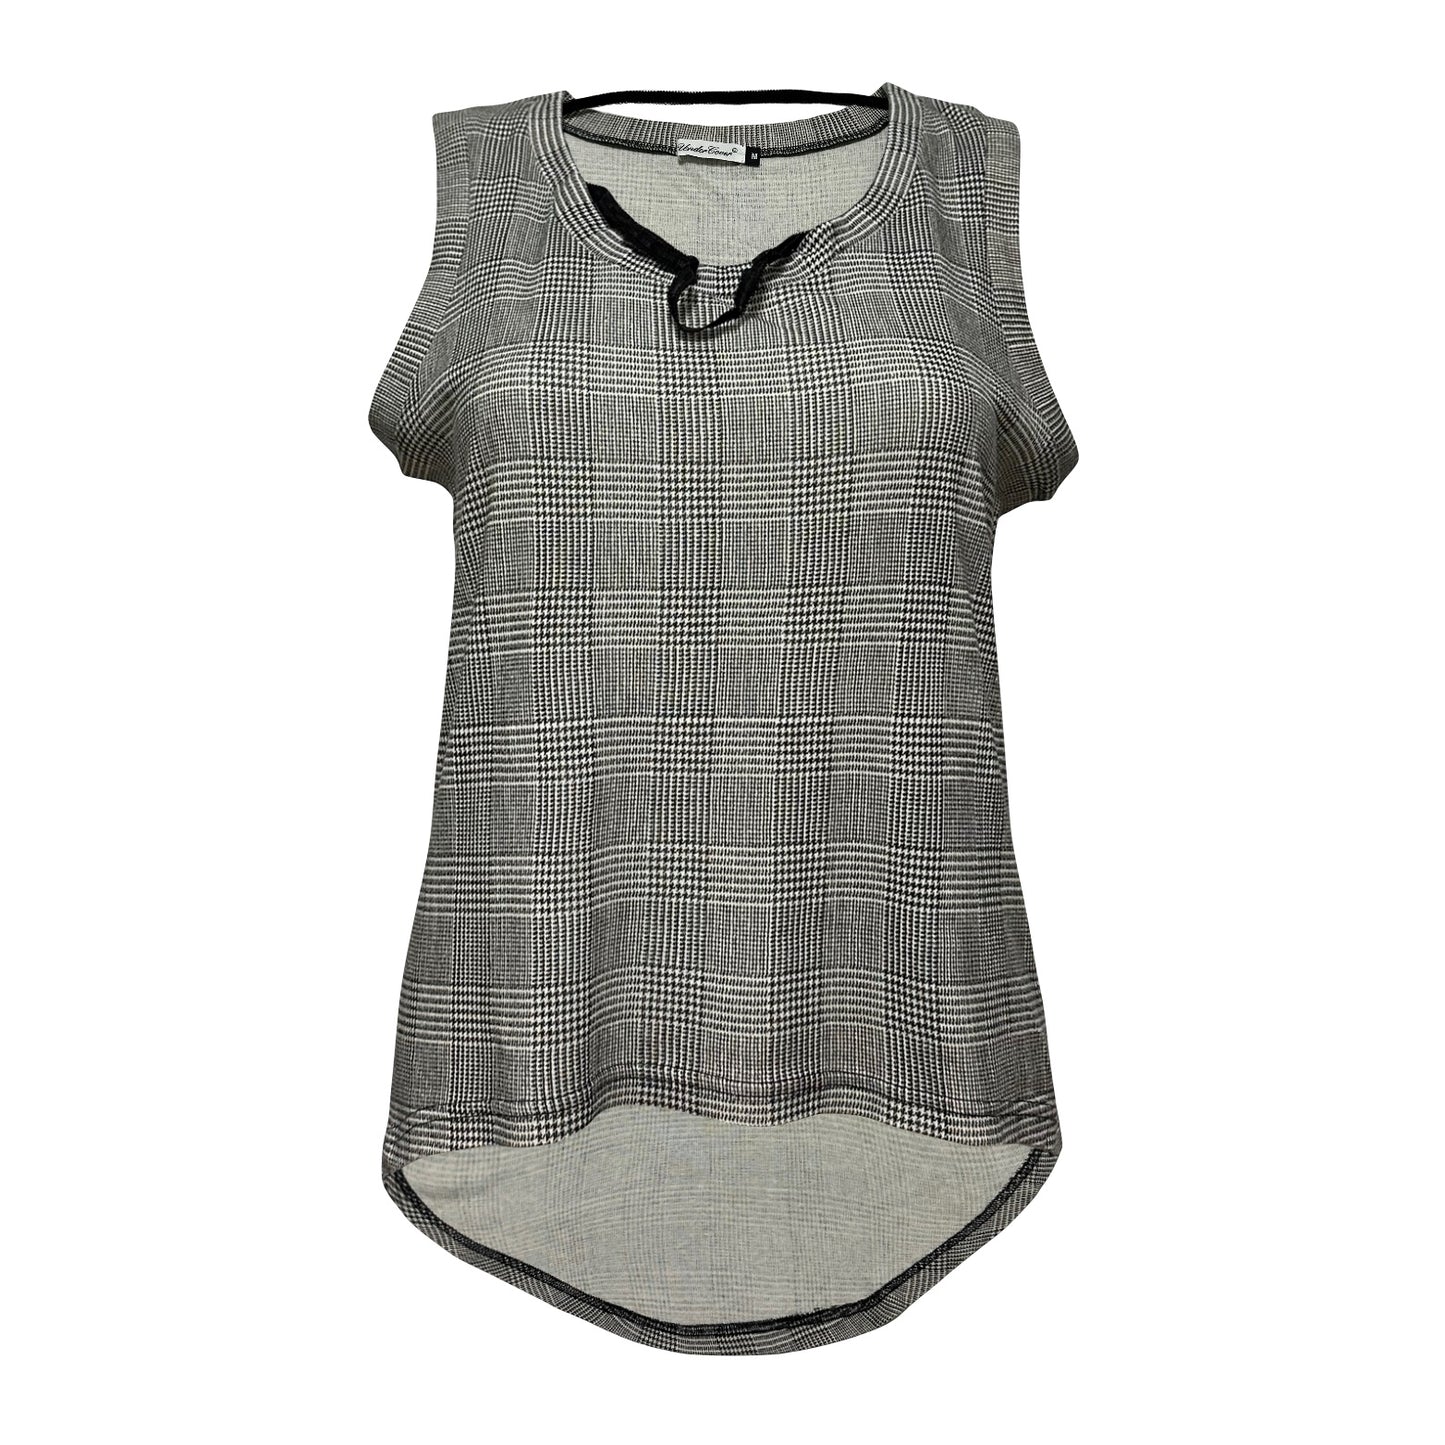 UNDERCOVER Spring Summer 2004 "Languid" Houndstooth Pattern Tank Top